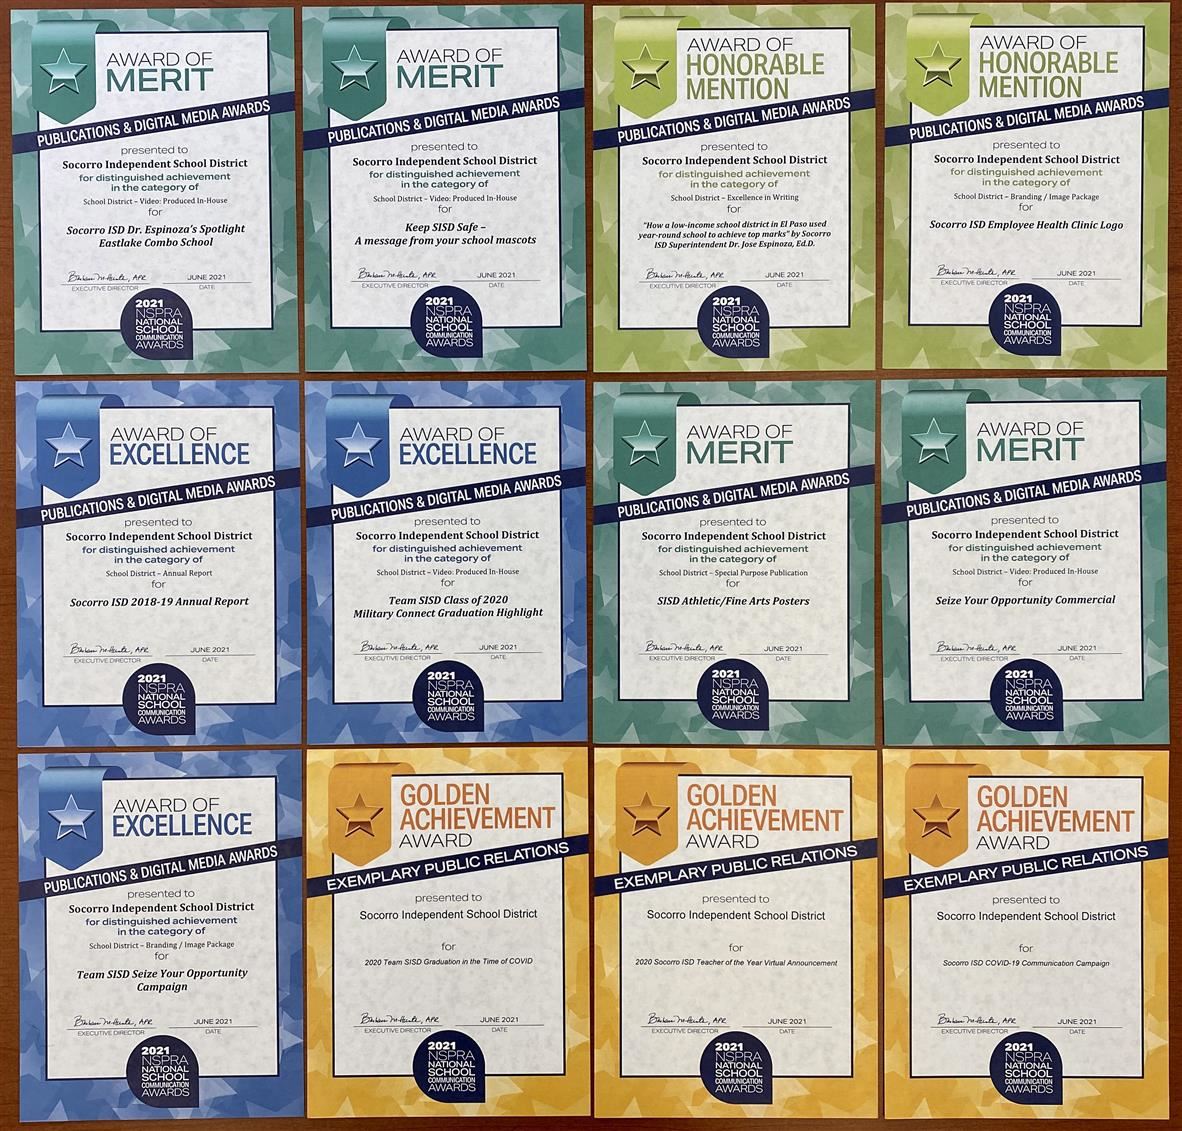 an image of paper copies of lists awards above side-by-side